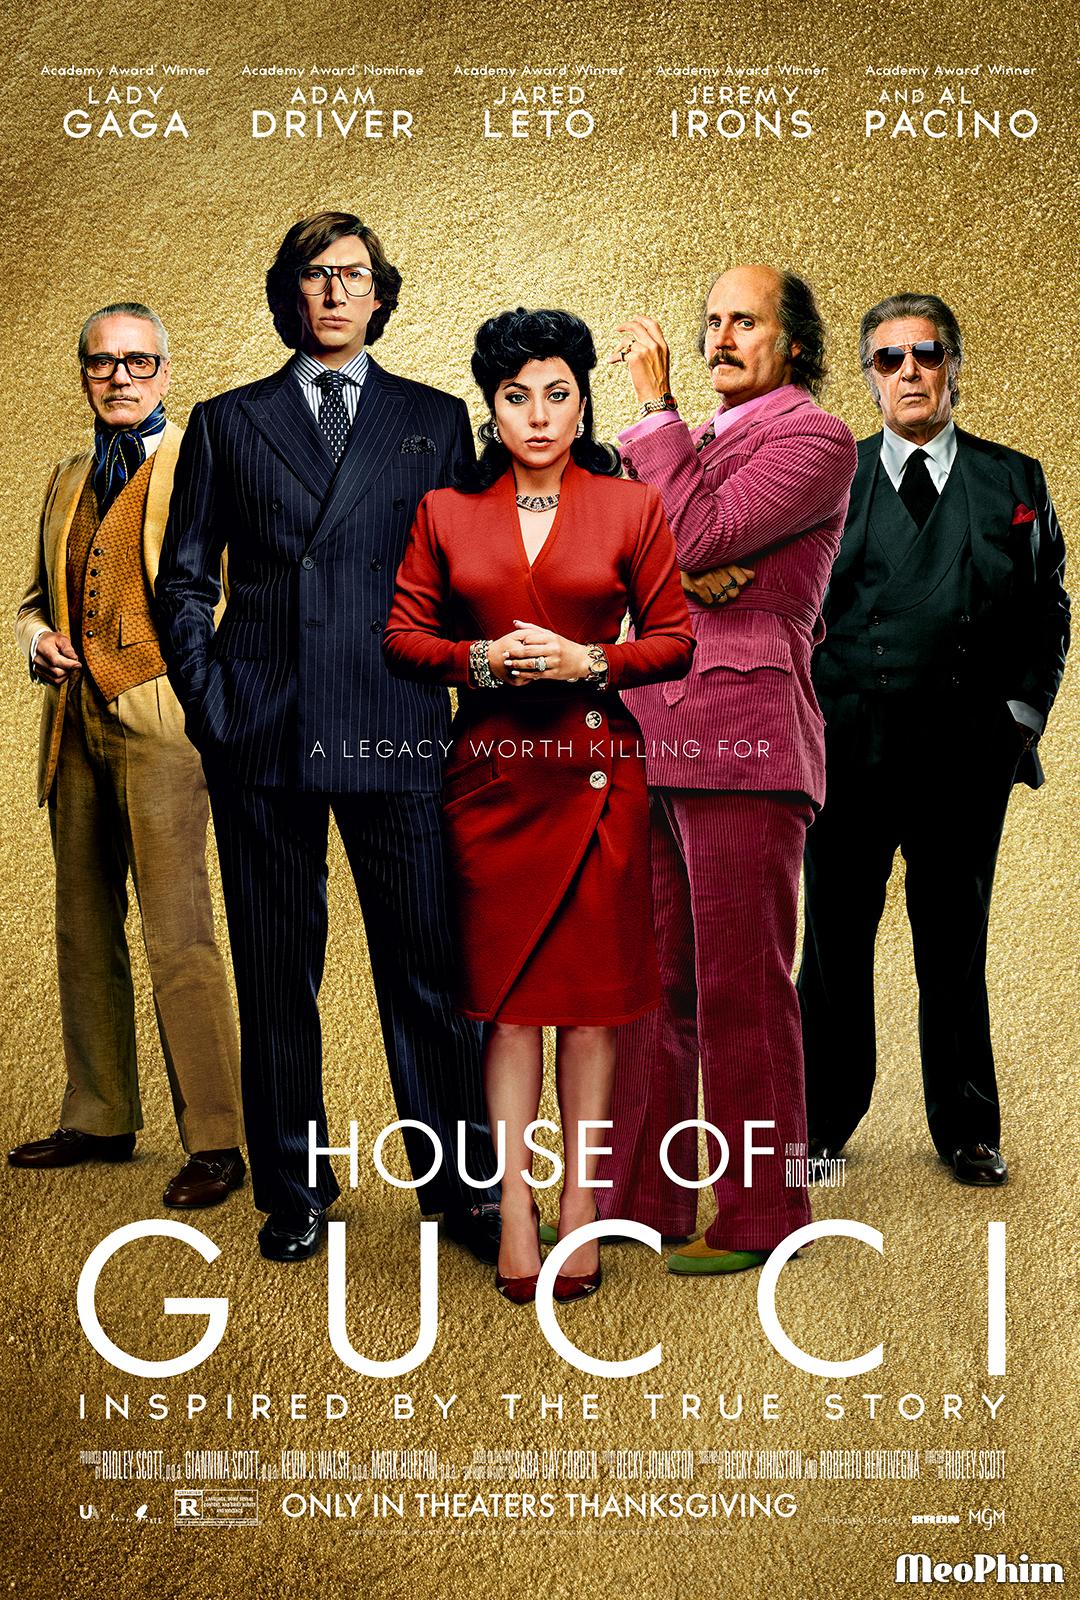 Gia Tộc Gucci - House Of Gucci (2022)